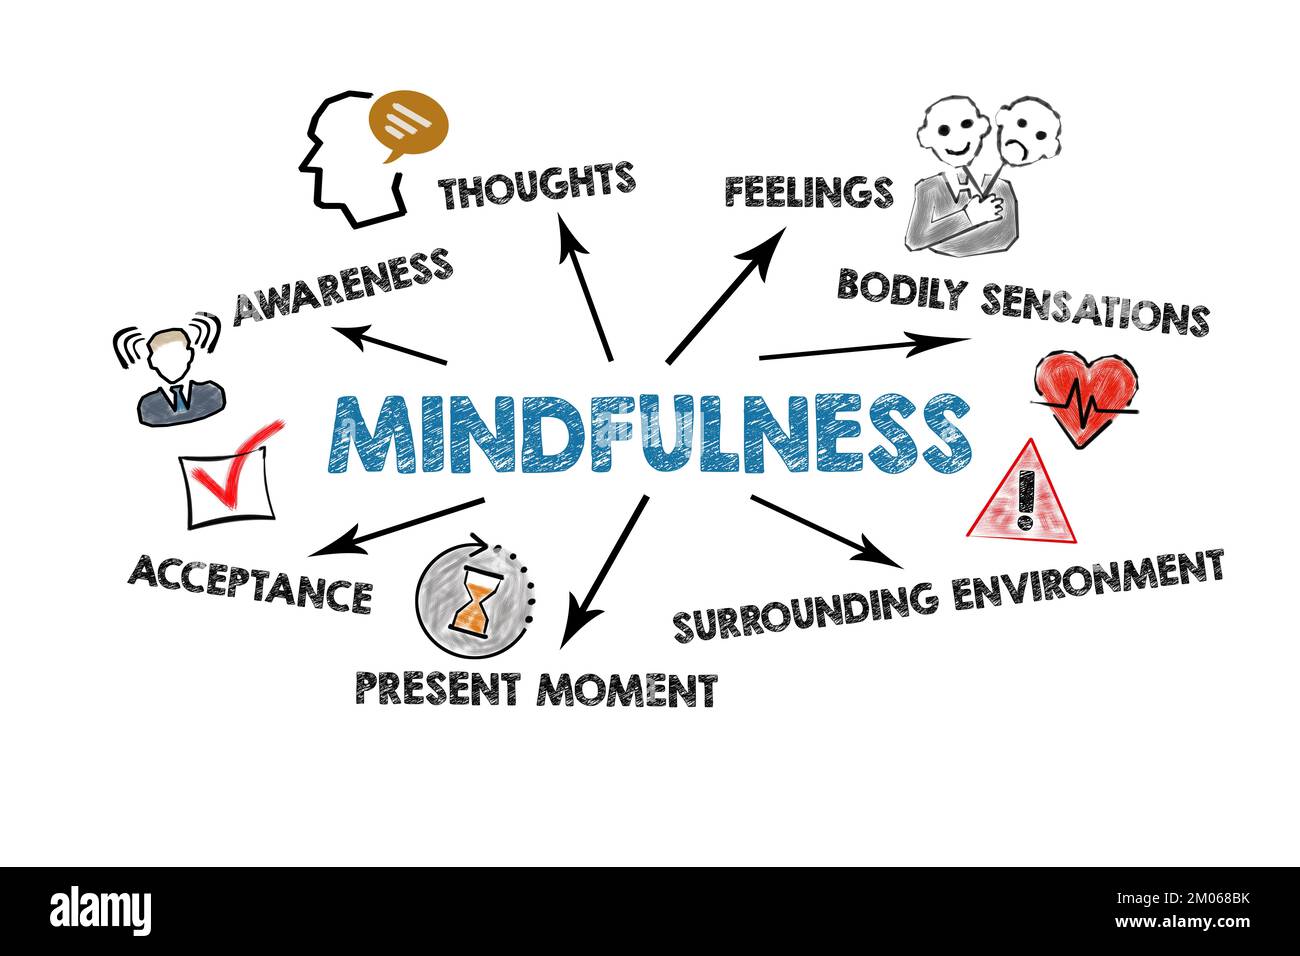 Mindfulness. Illustration with keywords, icons and arrows on a white background. Stock Photo